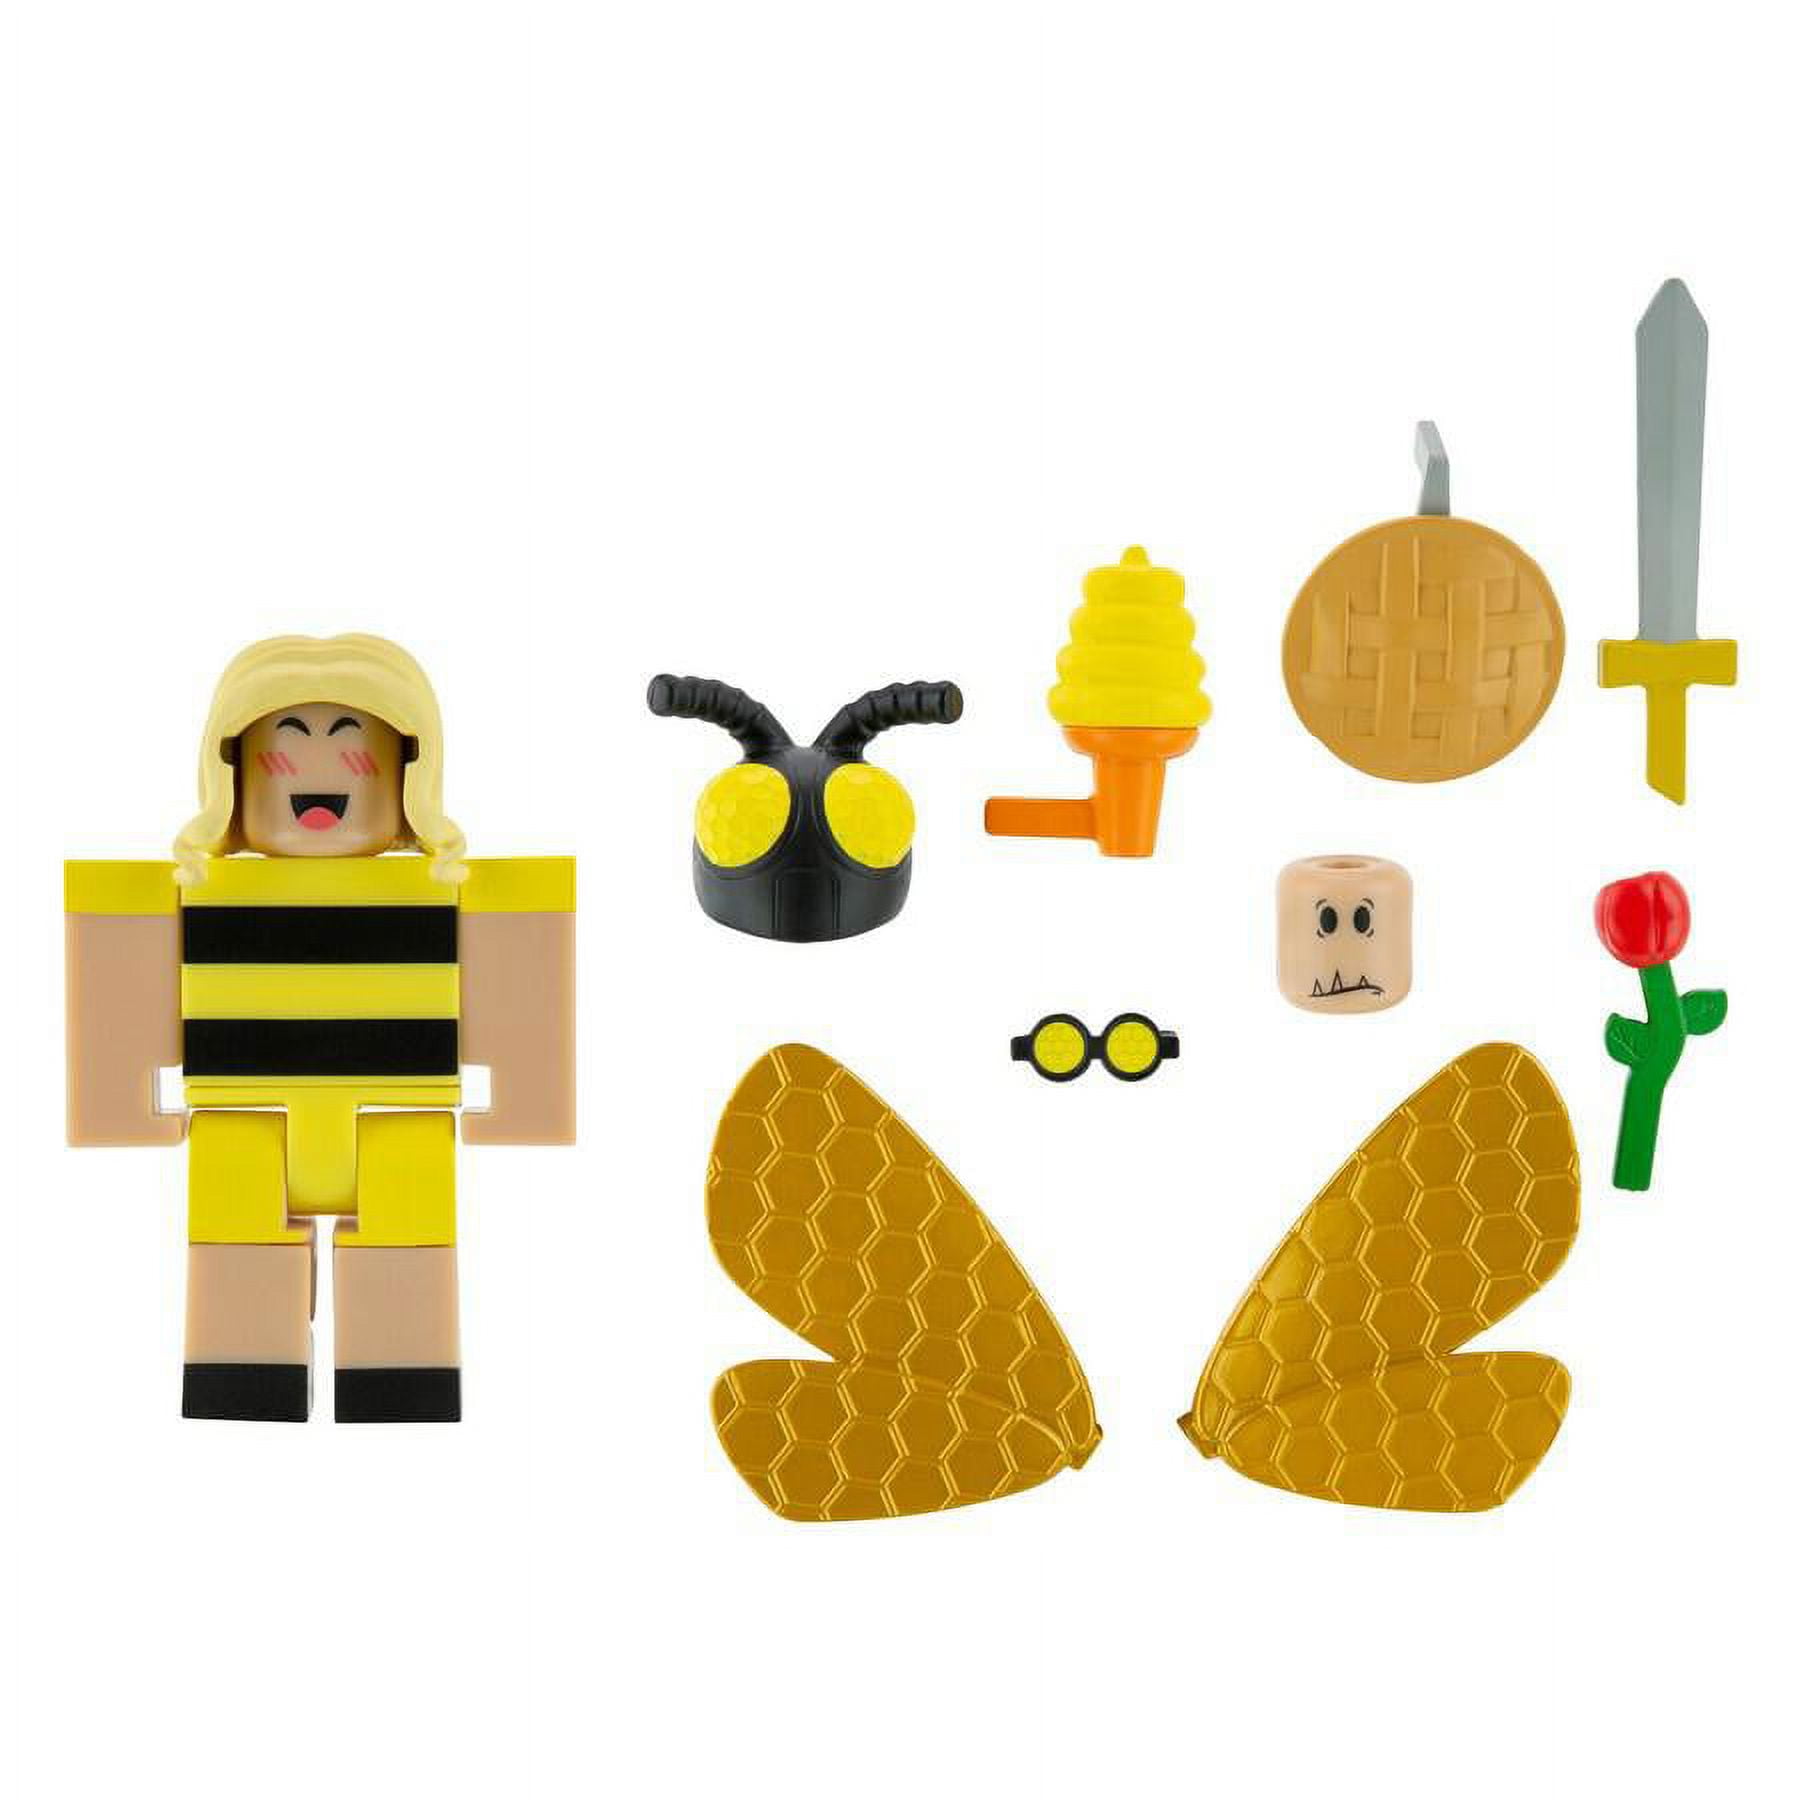 Roblox Avatar Shop Just Bee Yourself Action Figure 2.5”